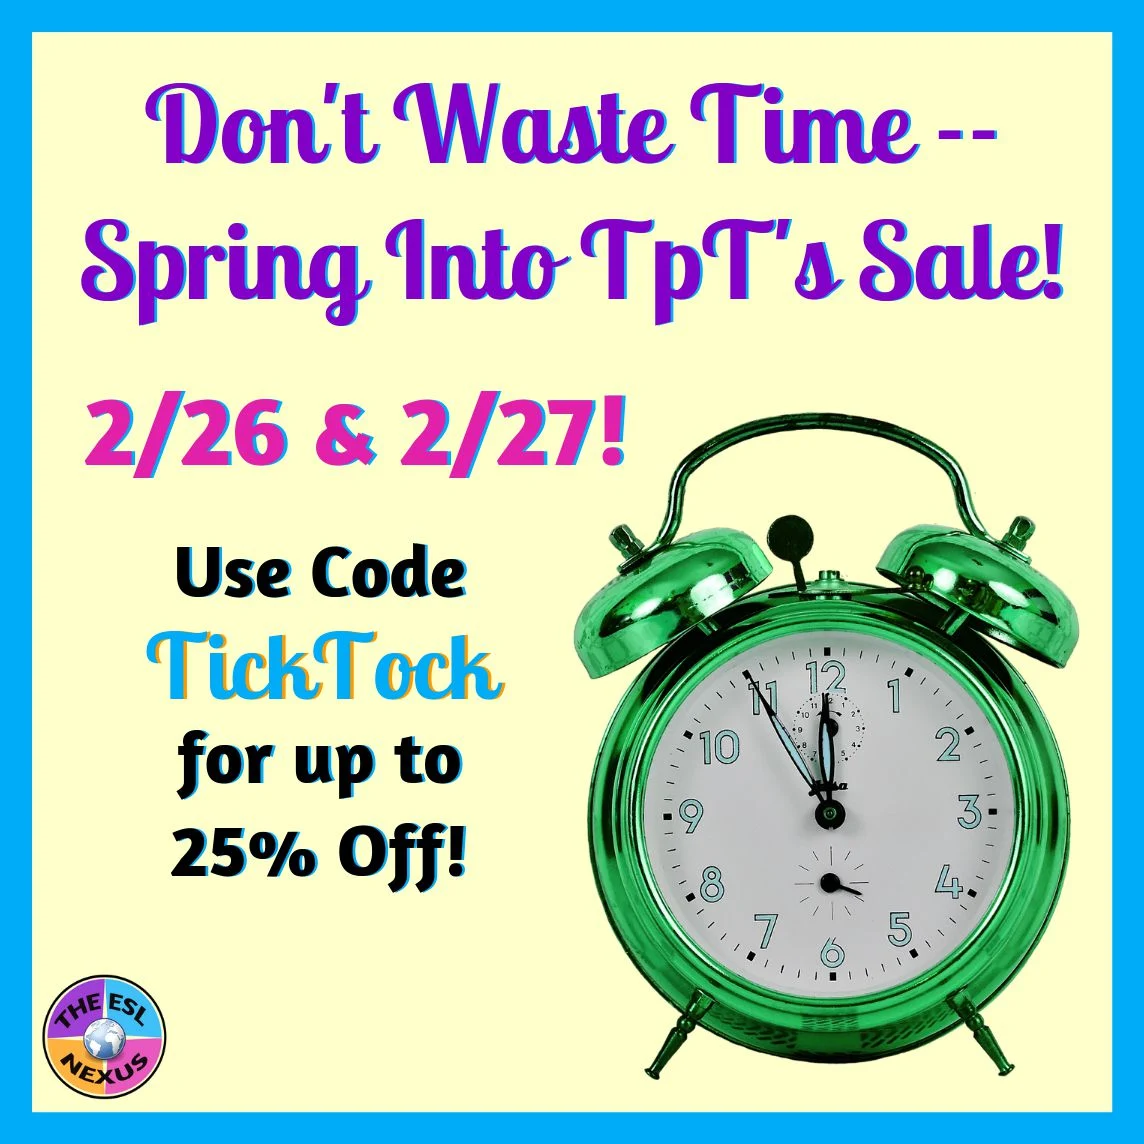 Enjoy savings up to 25% during TpT's February 2019 sale at The ESL Nexus TpT store!